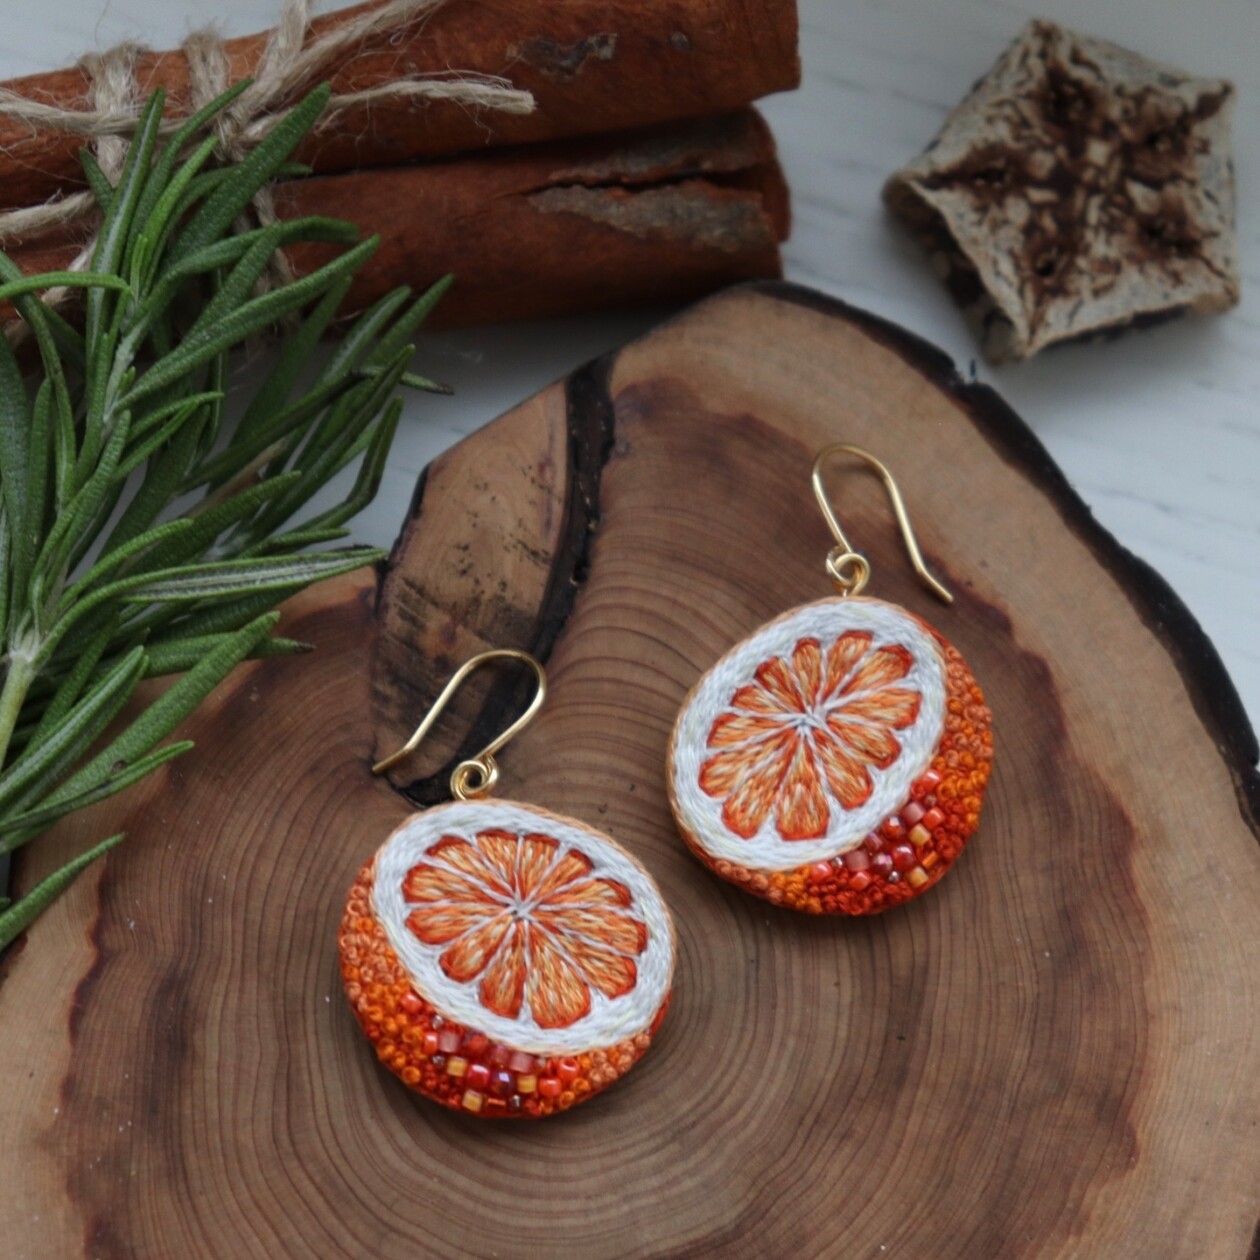 Eye Catching Handmade Embroidered Earrings By Vivaembr (17)